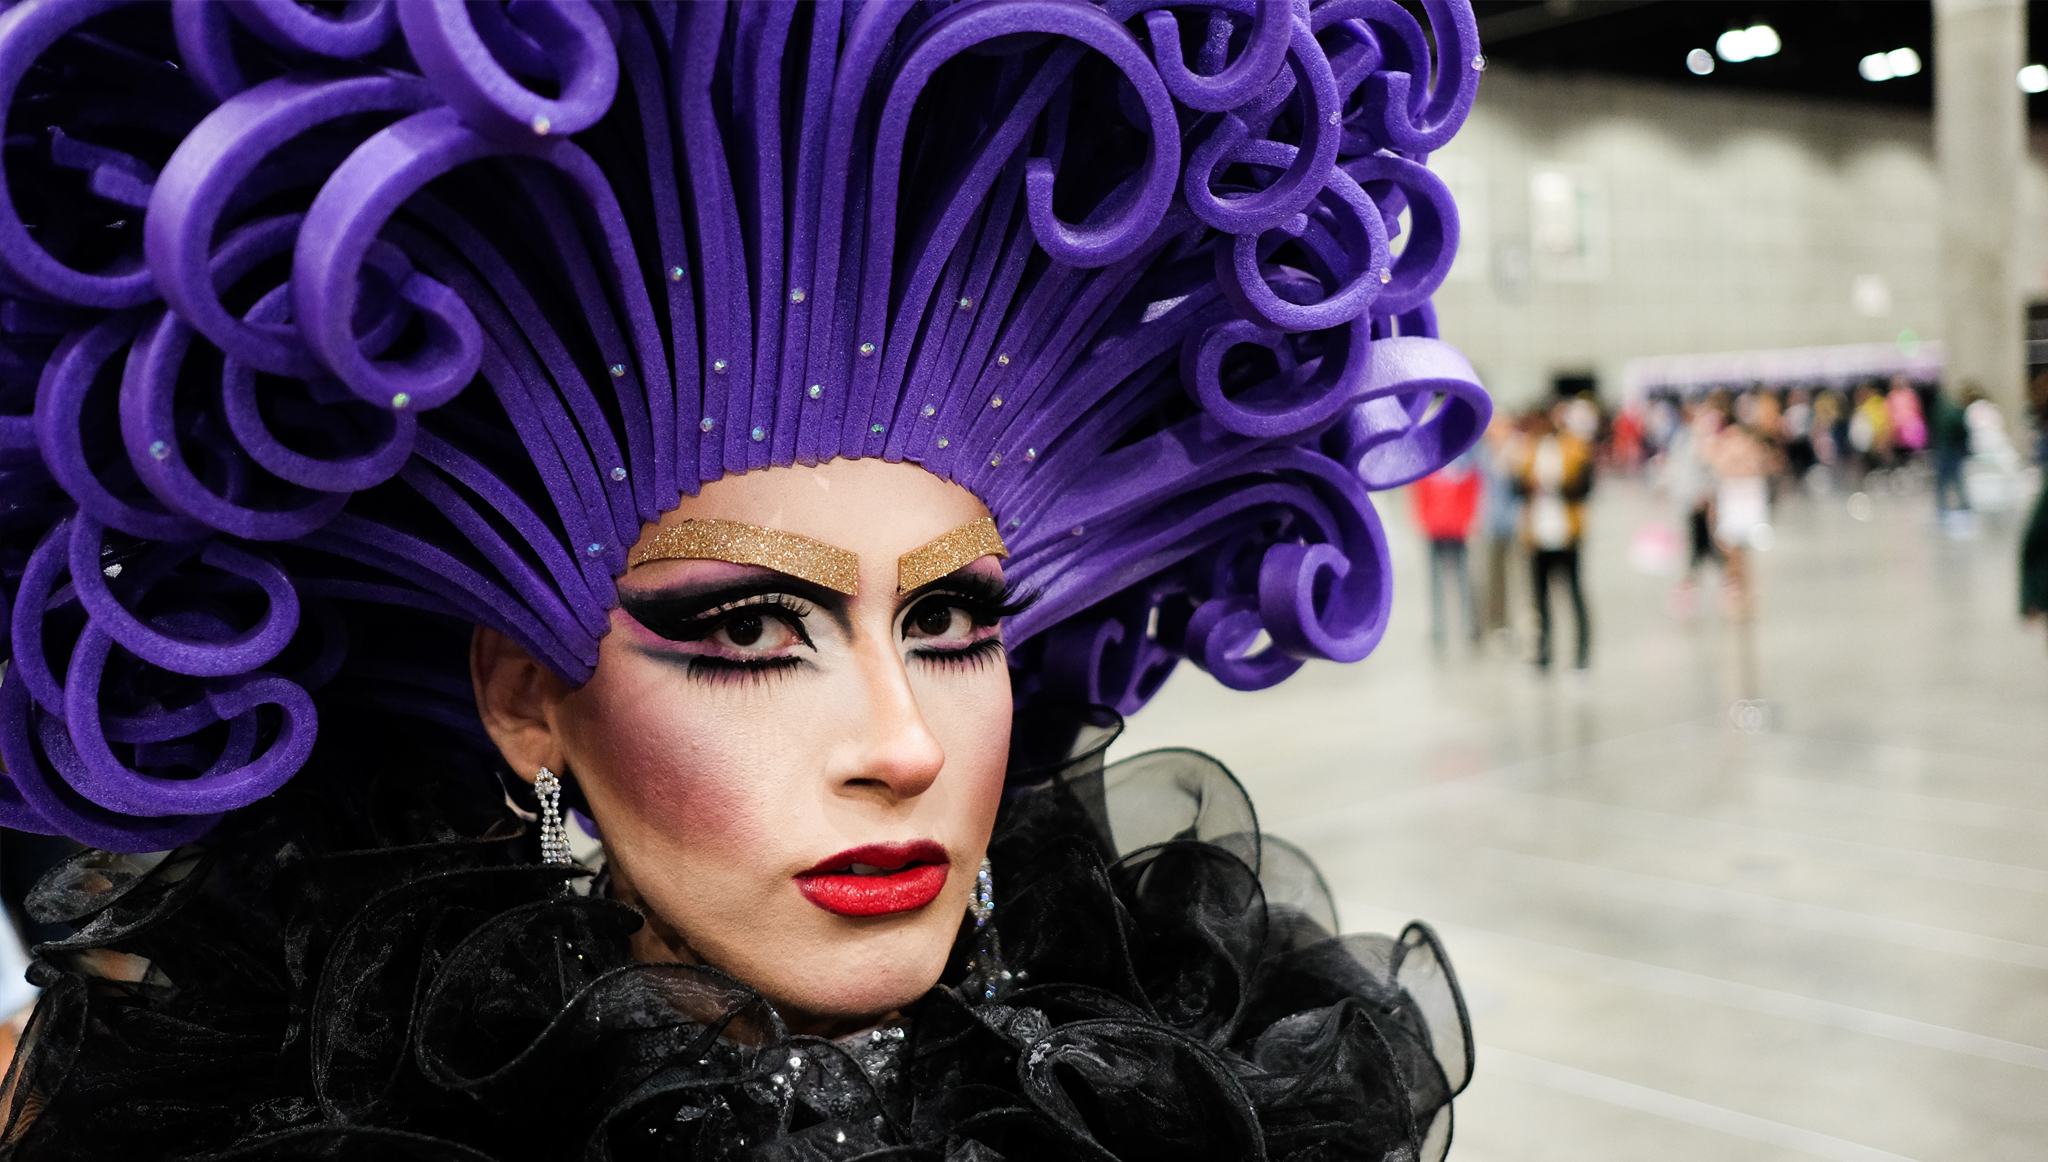 Drag queen in an ornate purple head dress with sparkles and glamorous makeup.